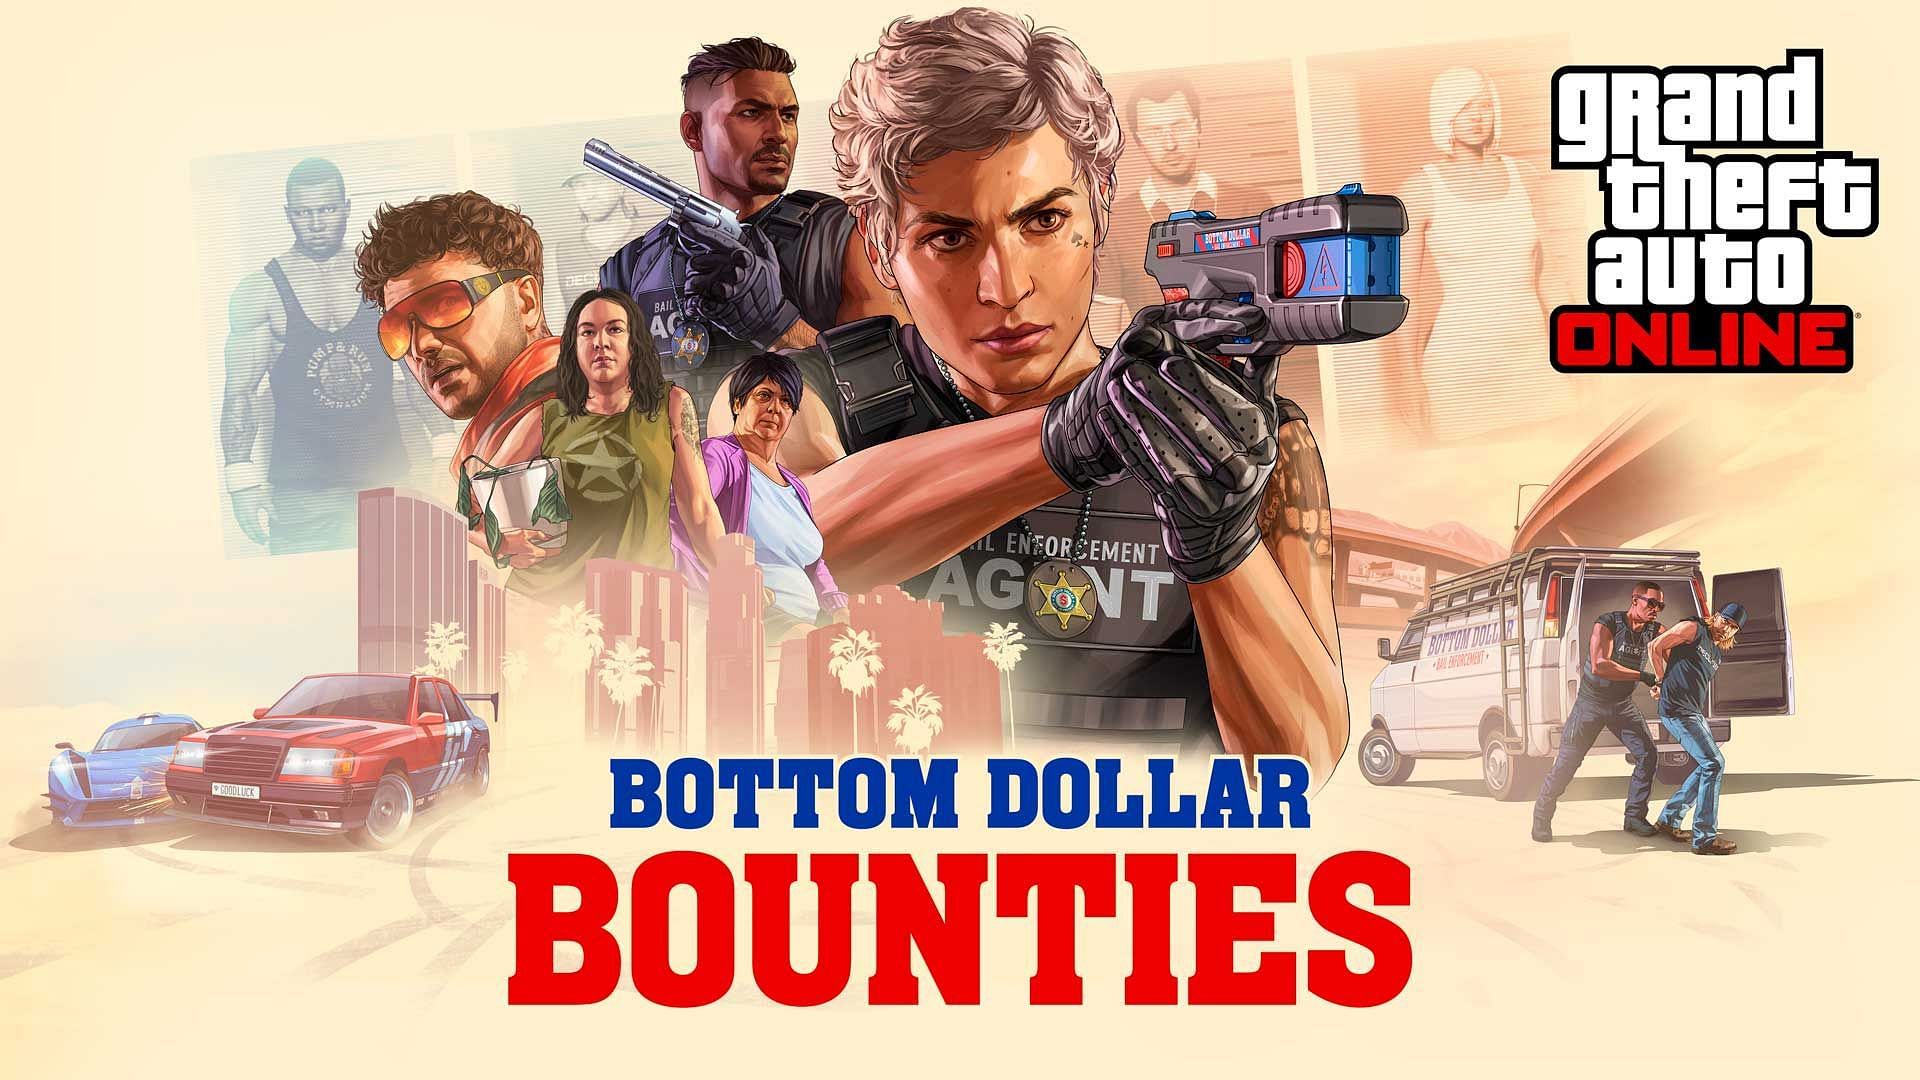 What systems will the GTA Online Bottom Dollar Bounties DLC be available on